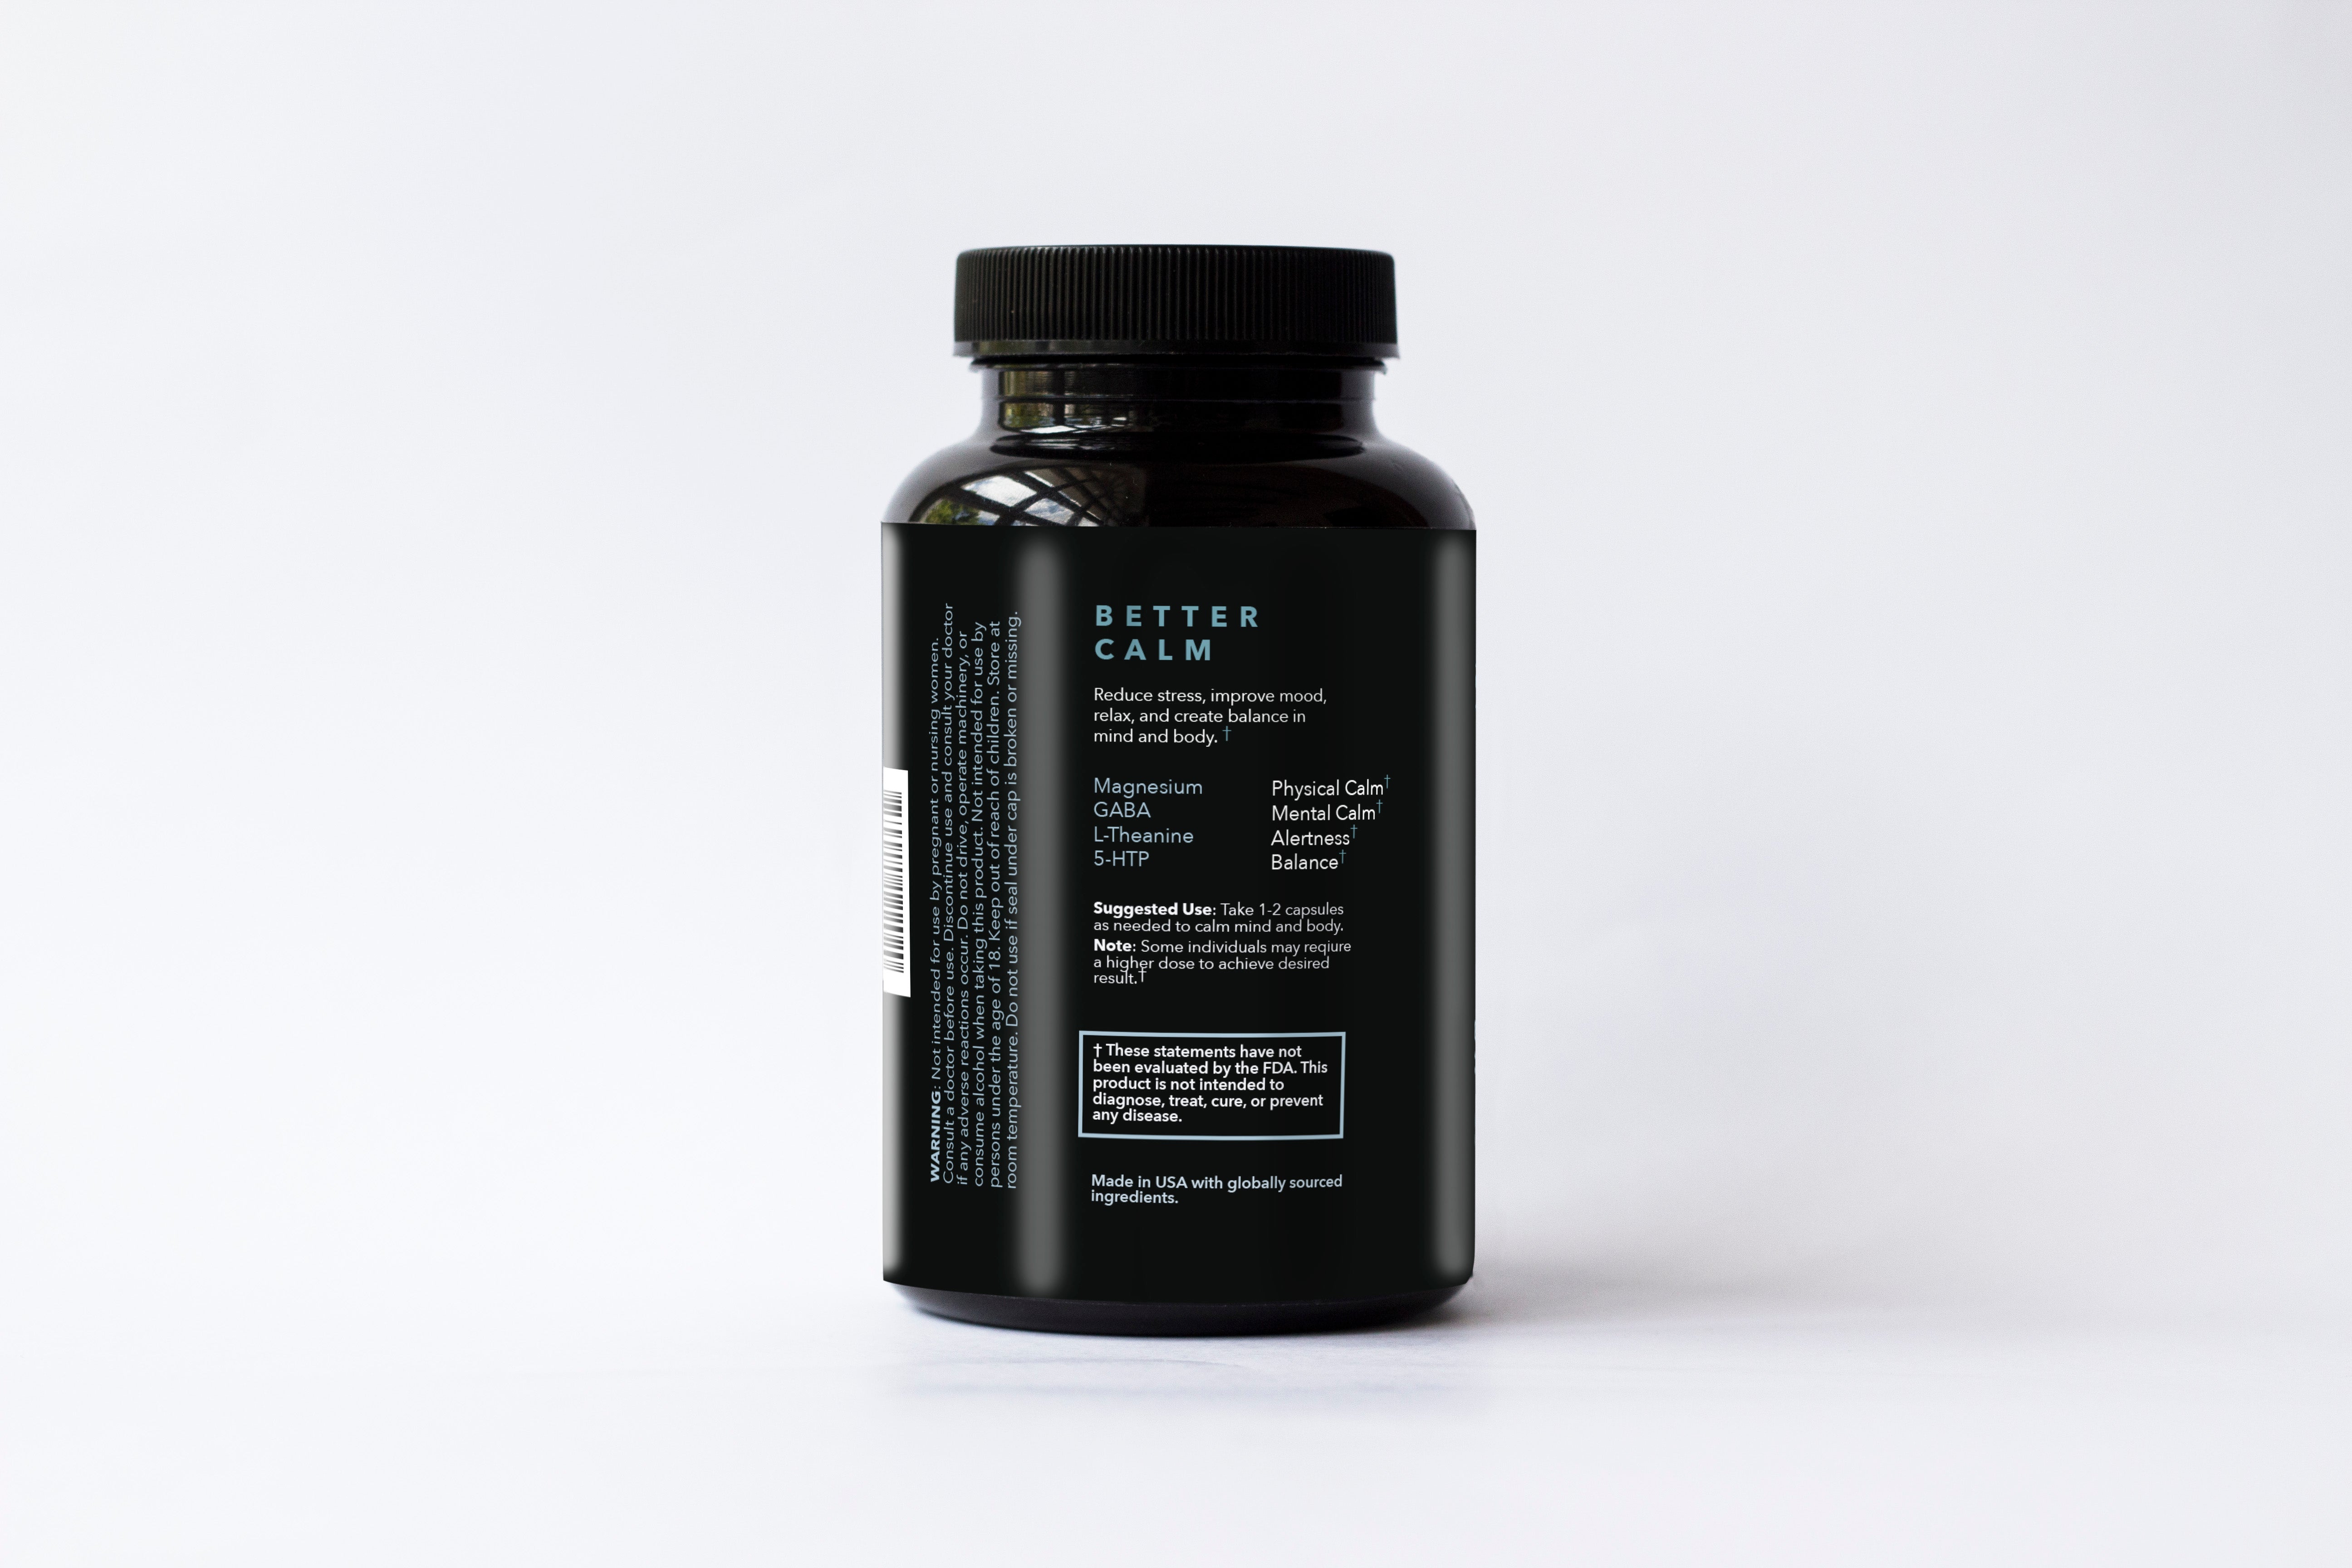 Back of Better Calm bottle listing ingredients: Magnesium for physical calm, GABA for mental calm, L-Theanine for Alertness, 5-HTP for Balance. Suggested use: take 1-2 capsules as needed to calm mind and body. Made in USA with globally sourced ingredients.